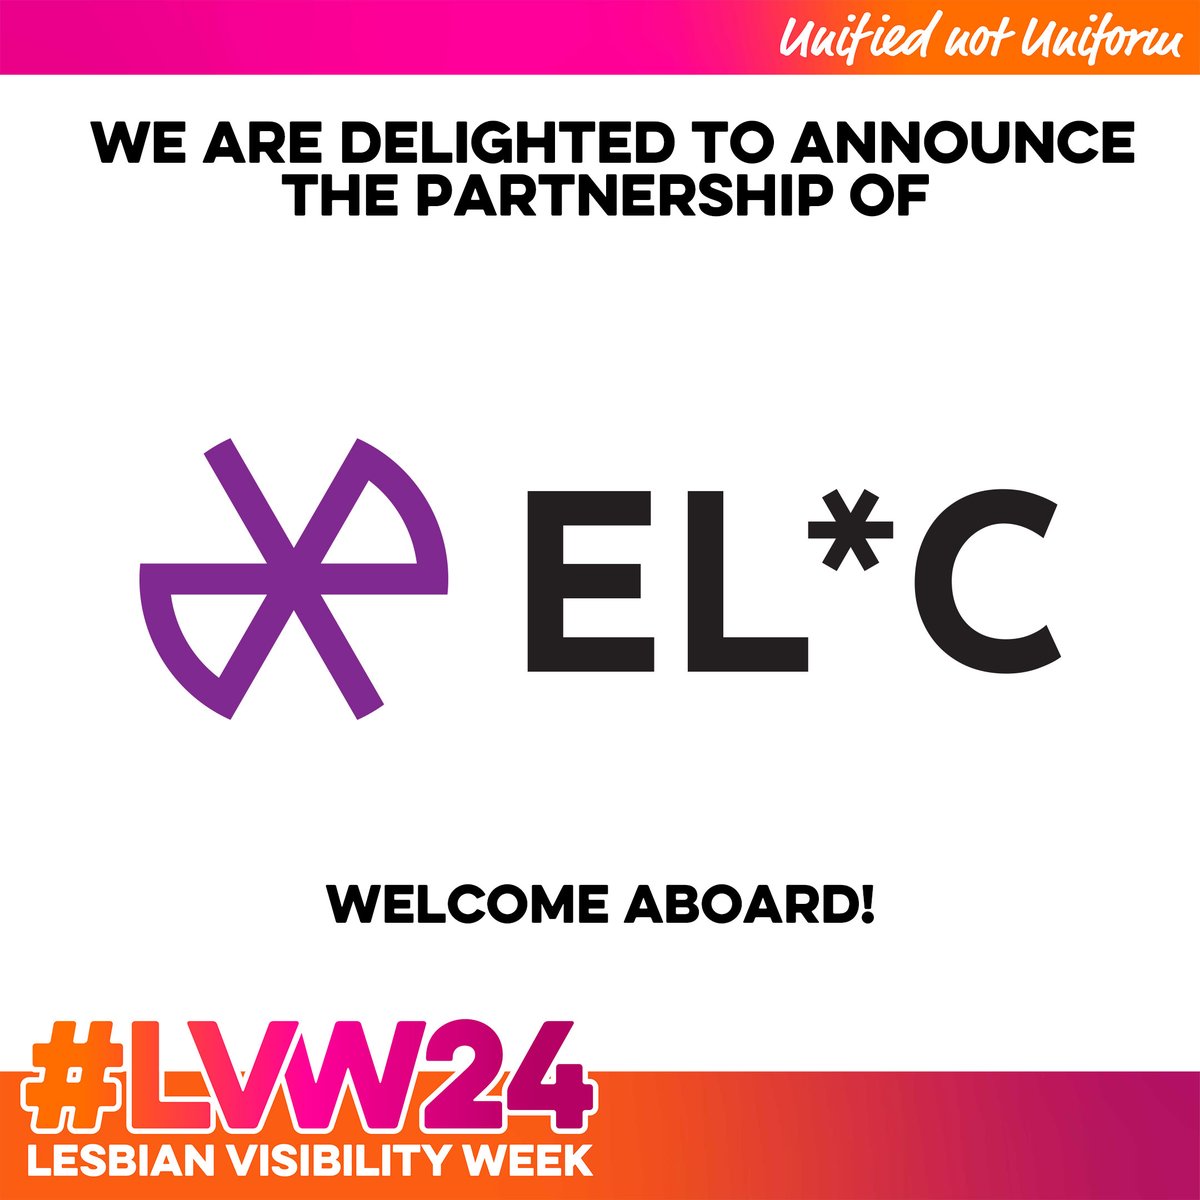 Who else is excited for #LVW24? We are thrilled to announce that @EuroLesbianCon is one of our charity partners 🌈 Learn more about Lesbian Visibility Week: lesbianvisibilityweek.com